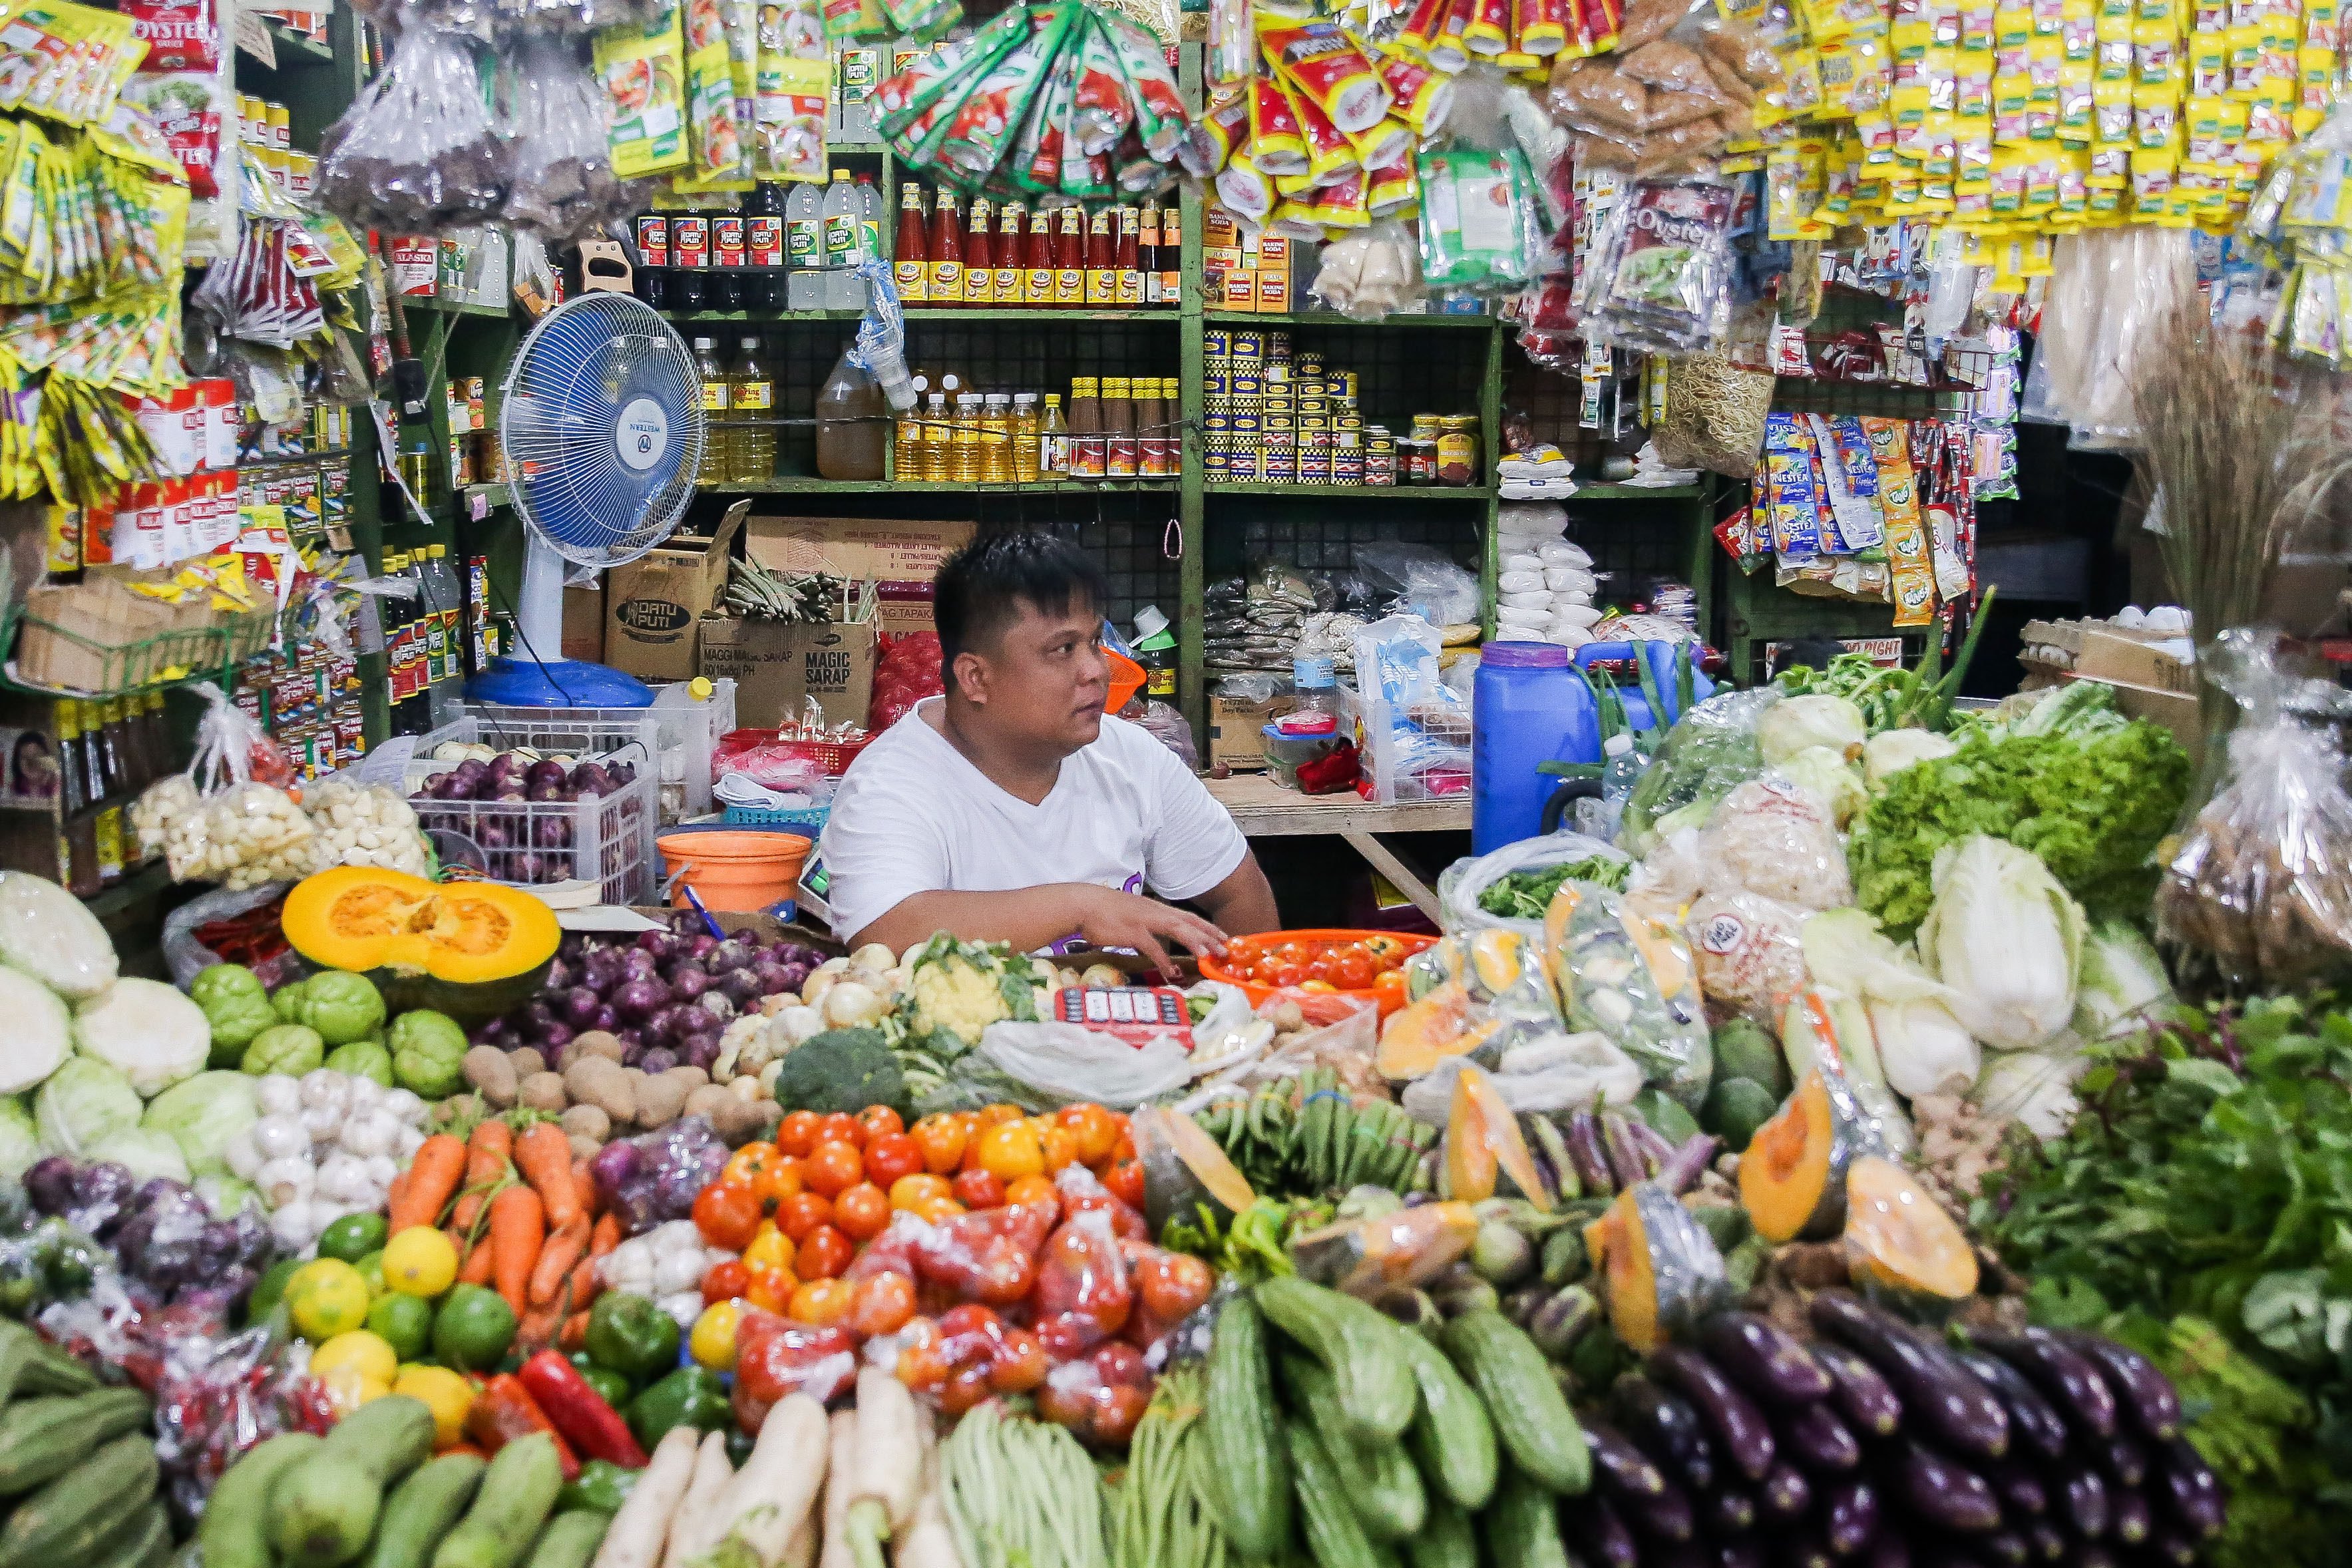 A vendor waits for customers inside his stall at a market in Quezon City, the Philippines. Photo: Xinhua